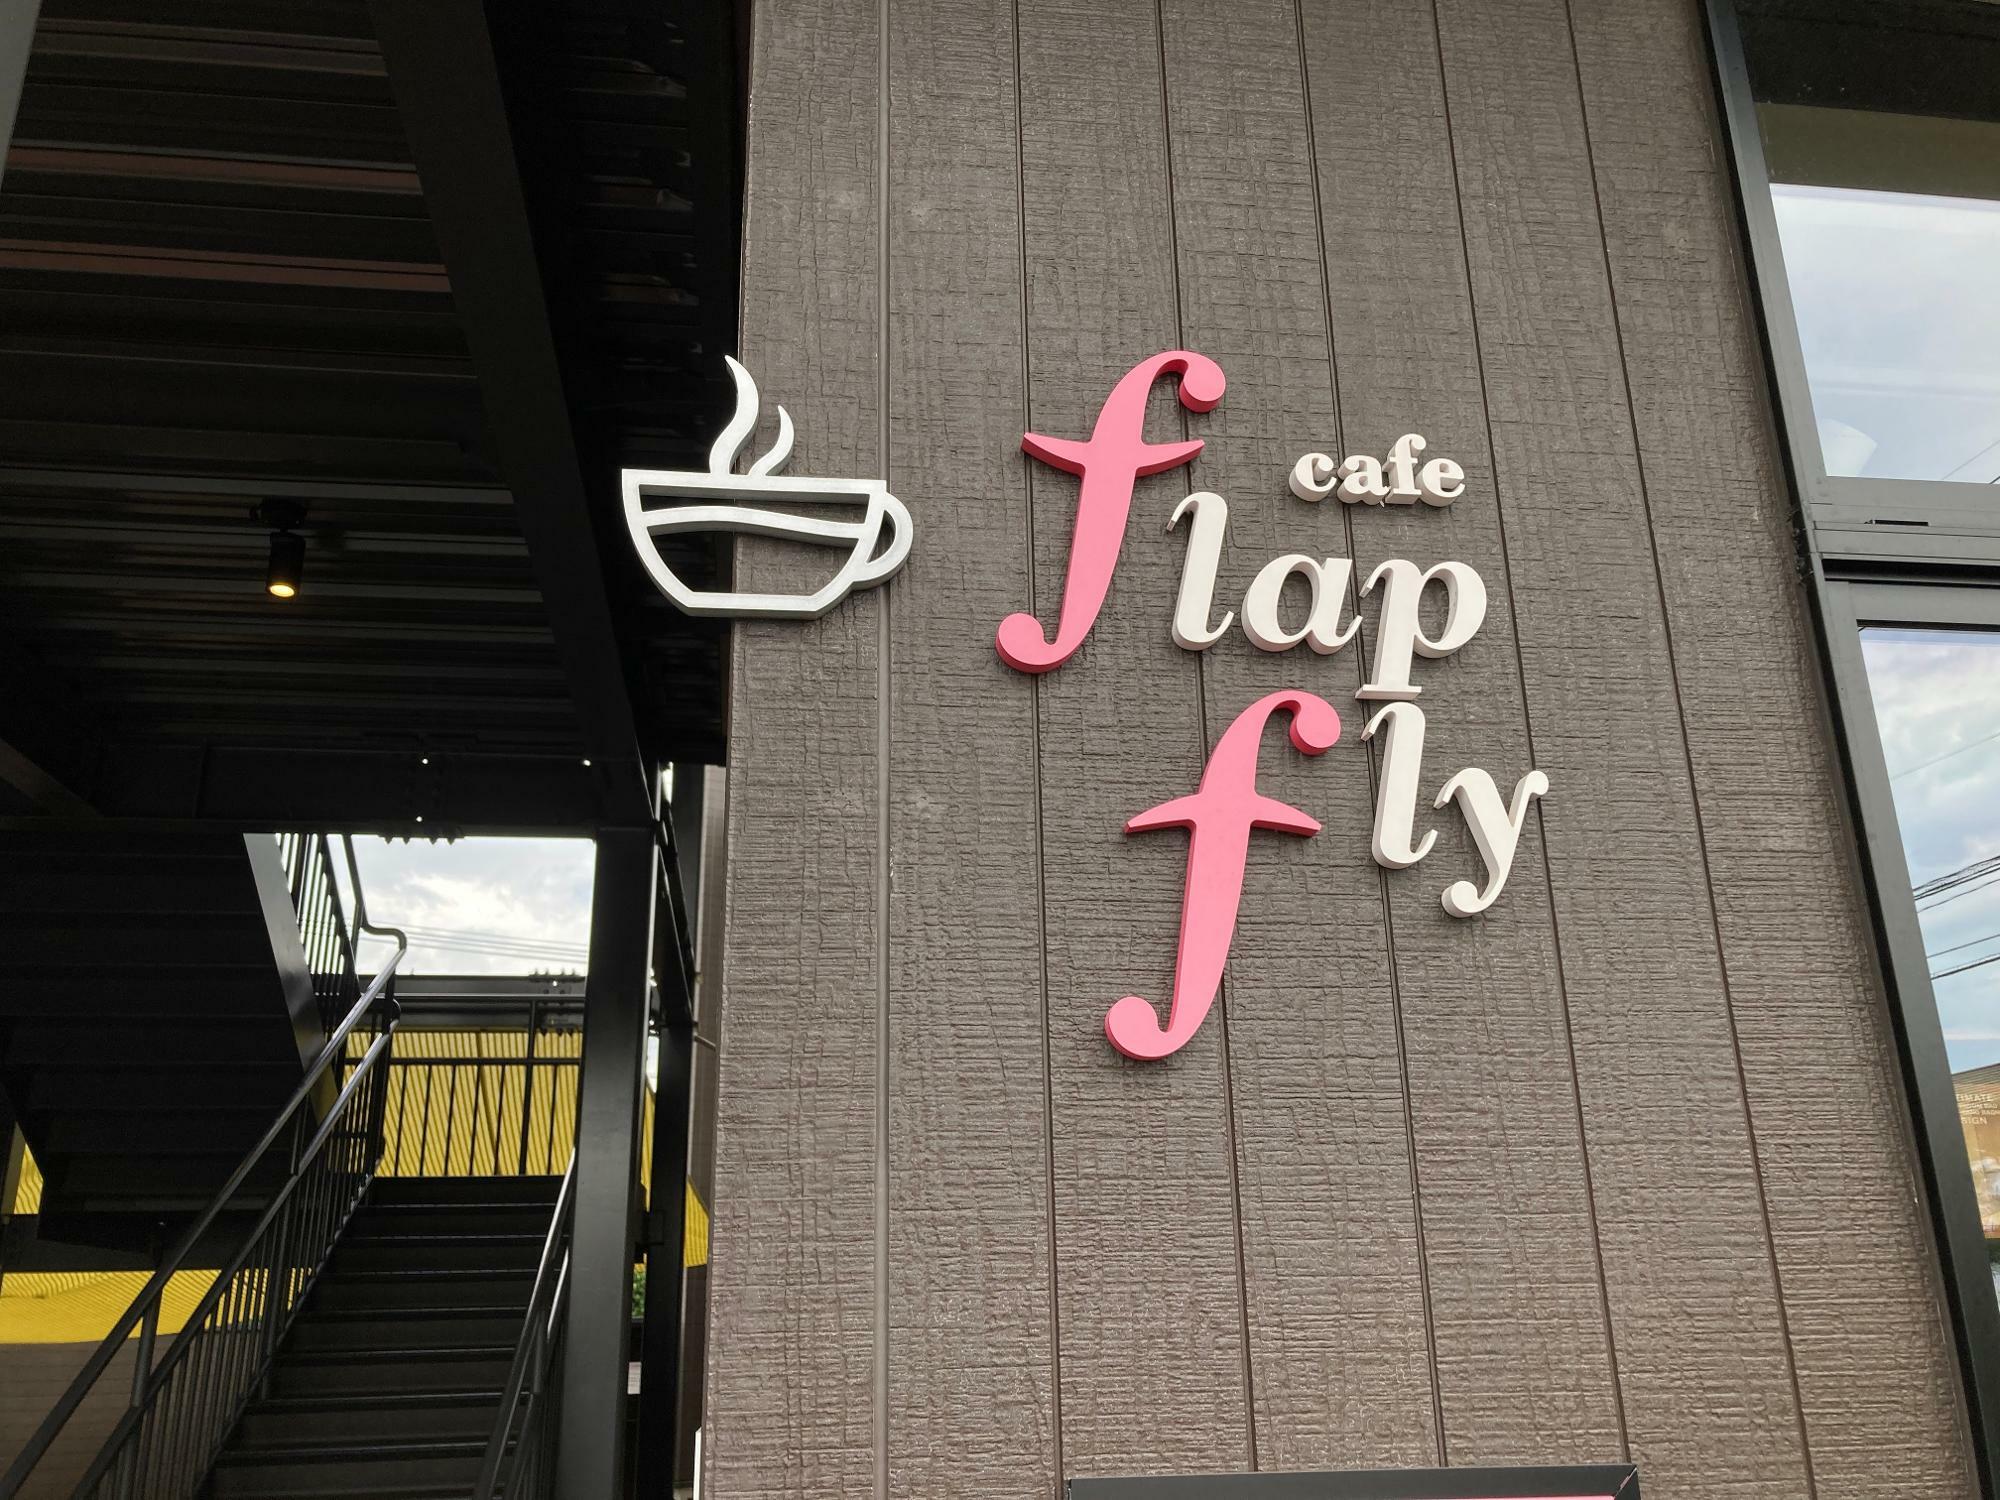 「cafe flap fly（カフェ フラップフライ）」